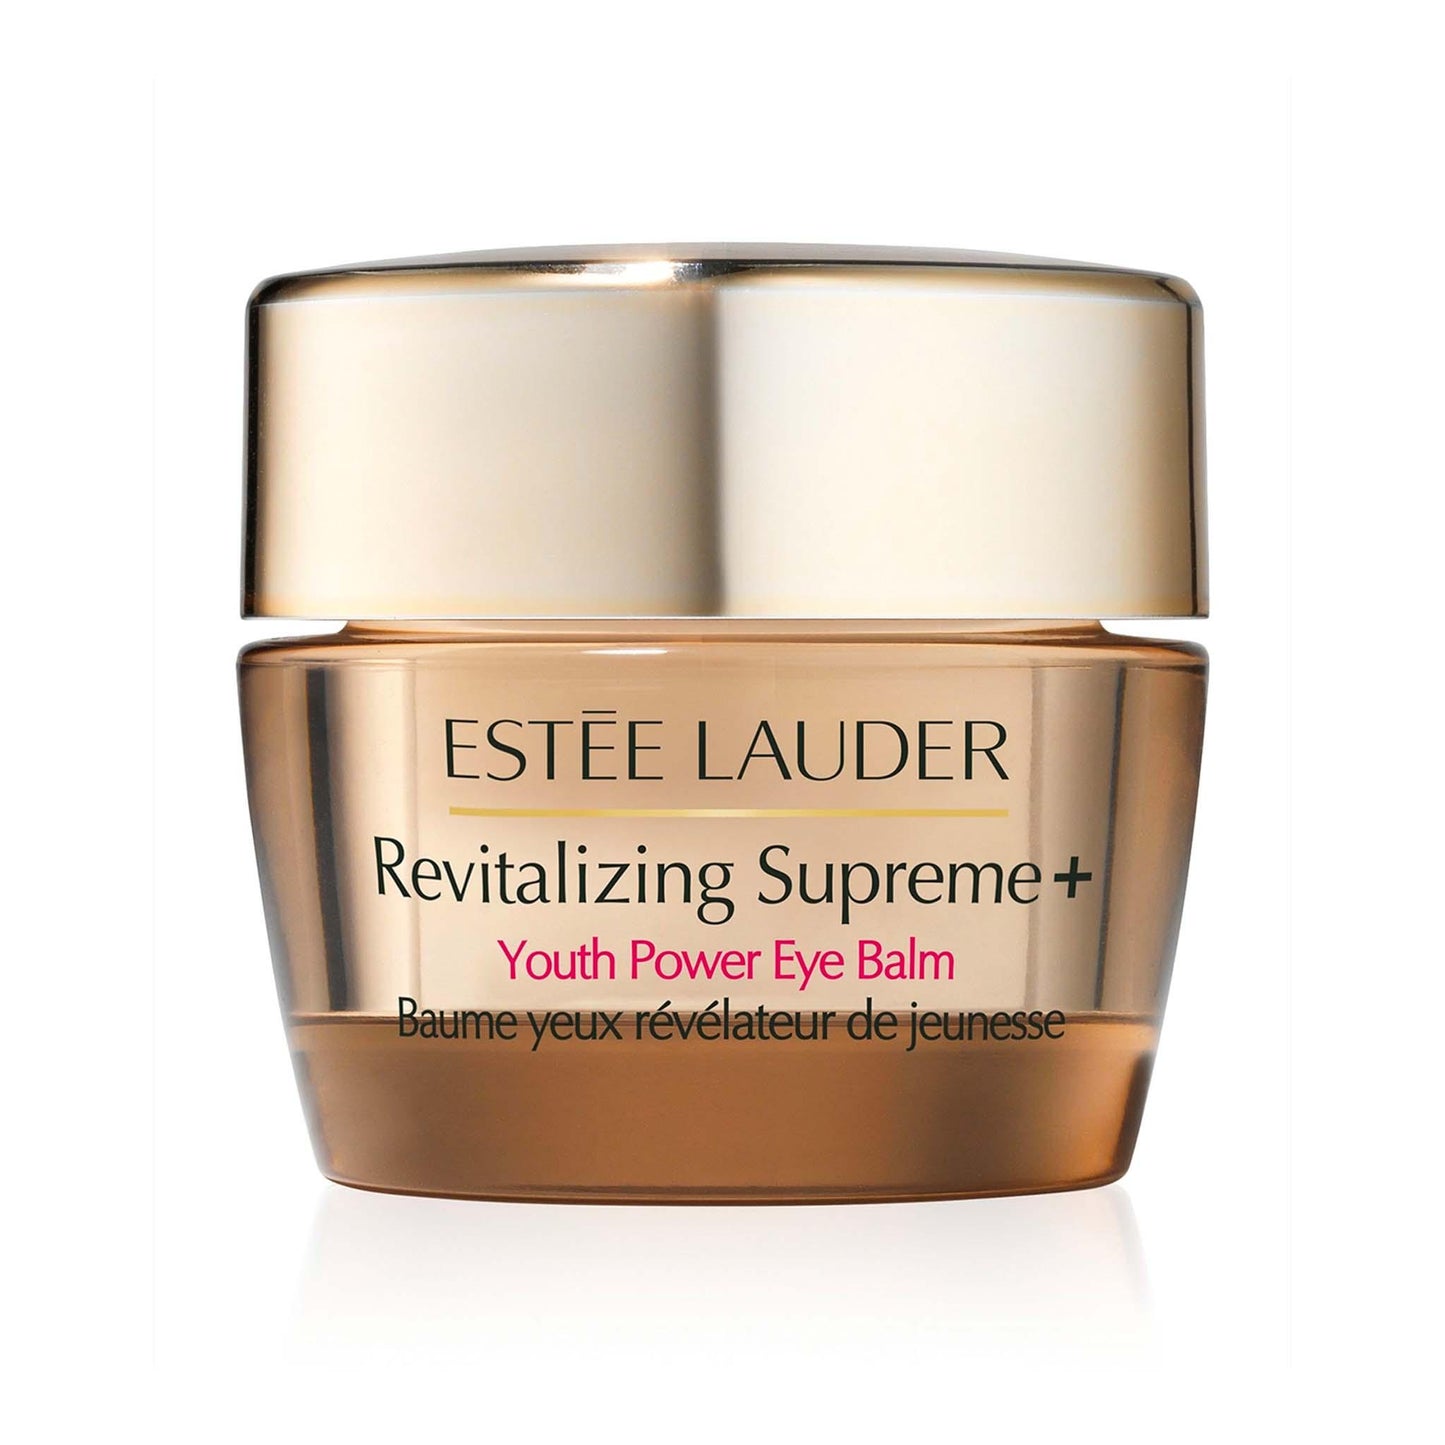 Revitalizing Supreme+ Youth Power Eye Balm - Cosmos Boutique New Jersey